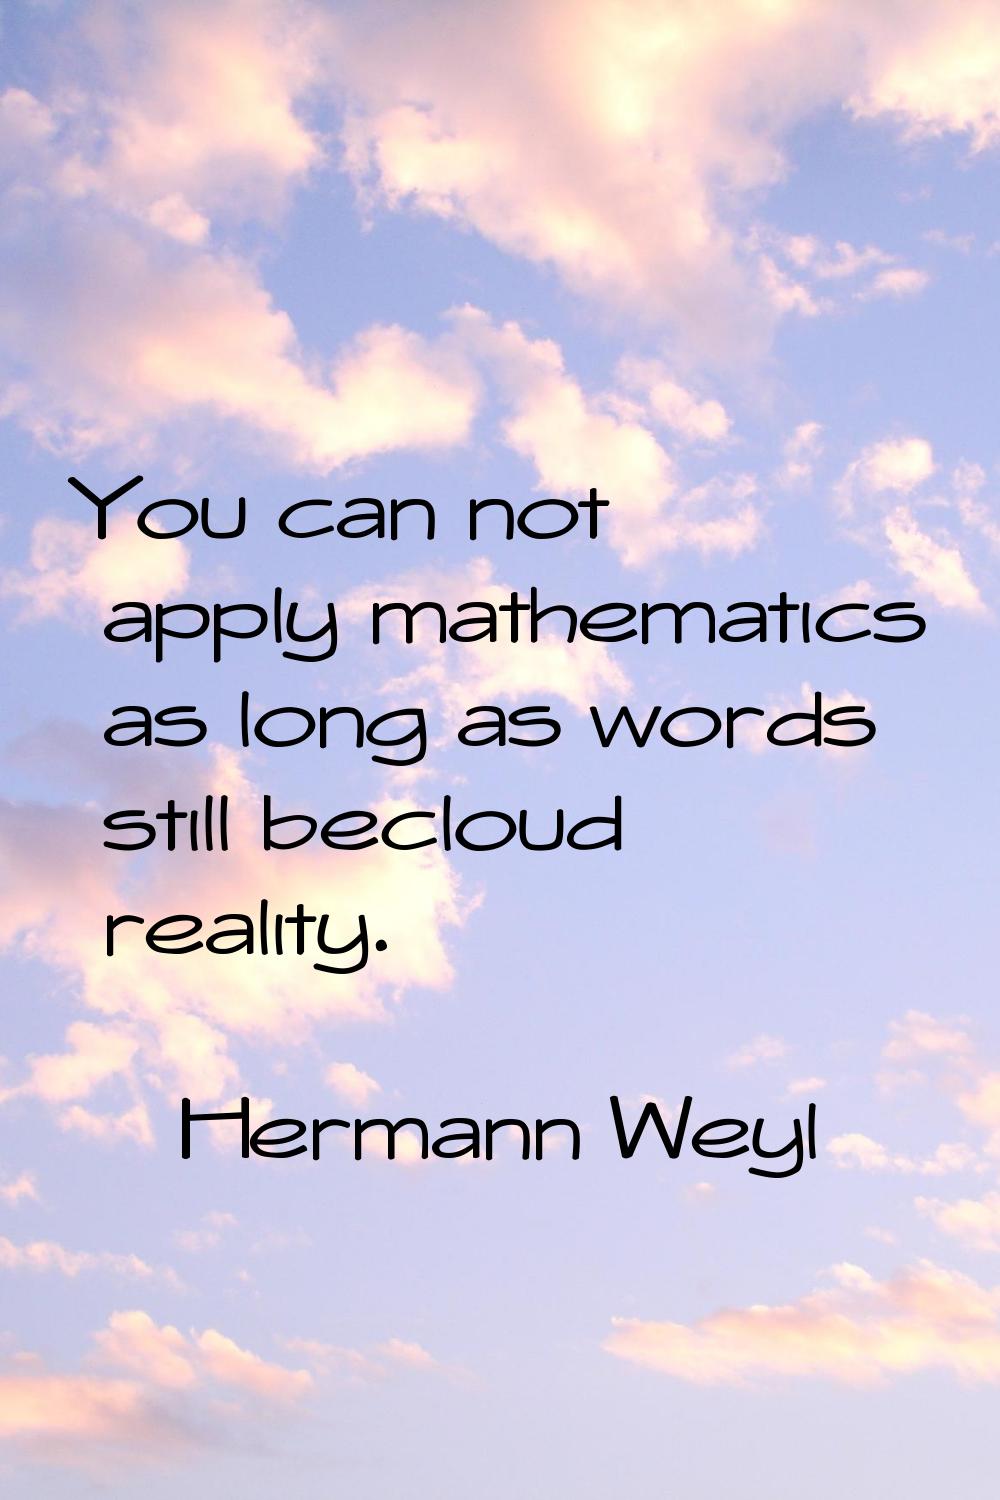 You can not apply mathematics as long as words still becloud reality.